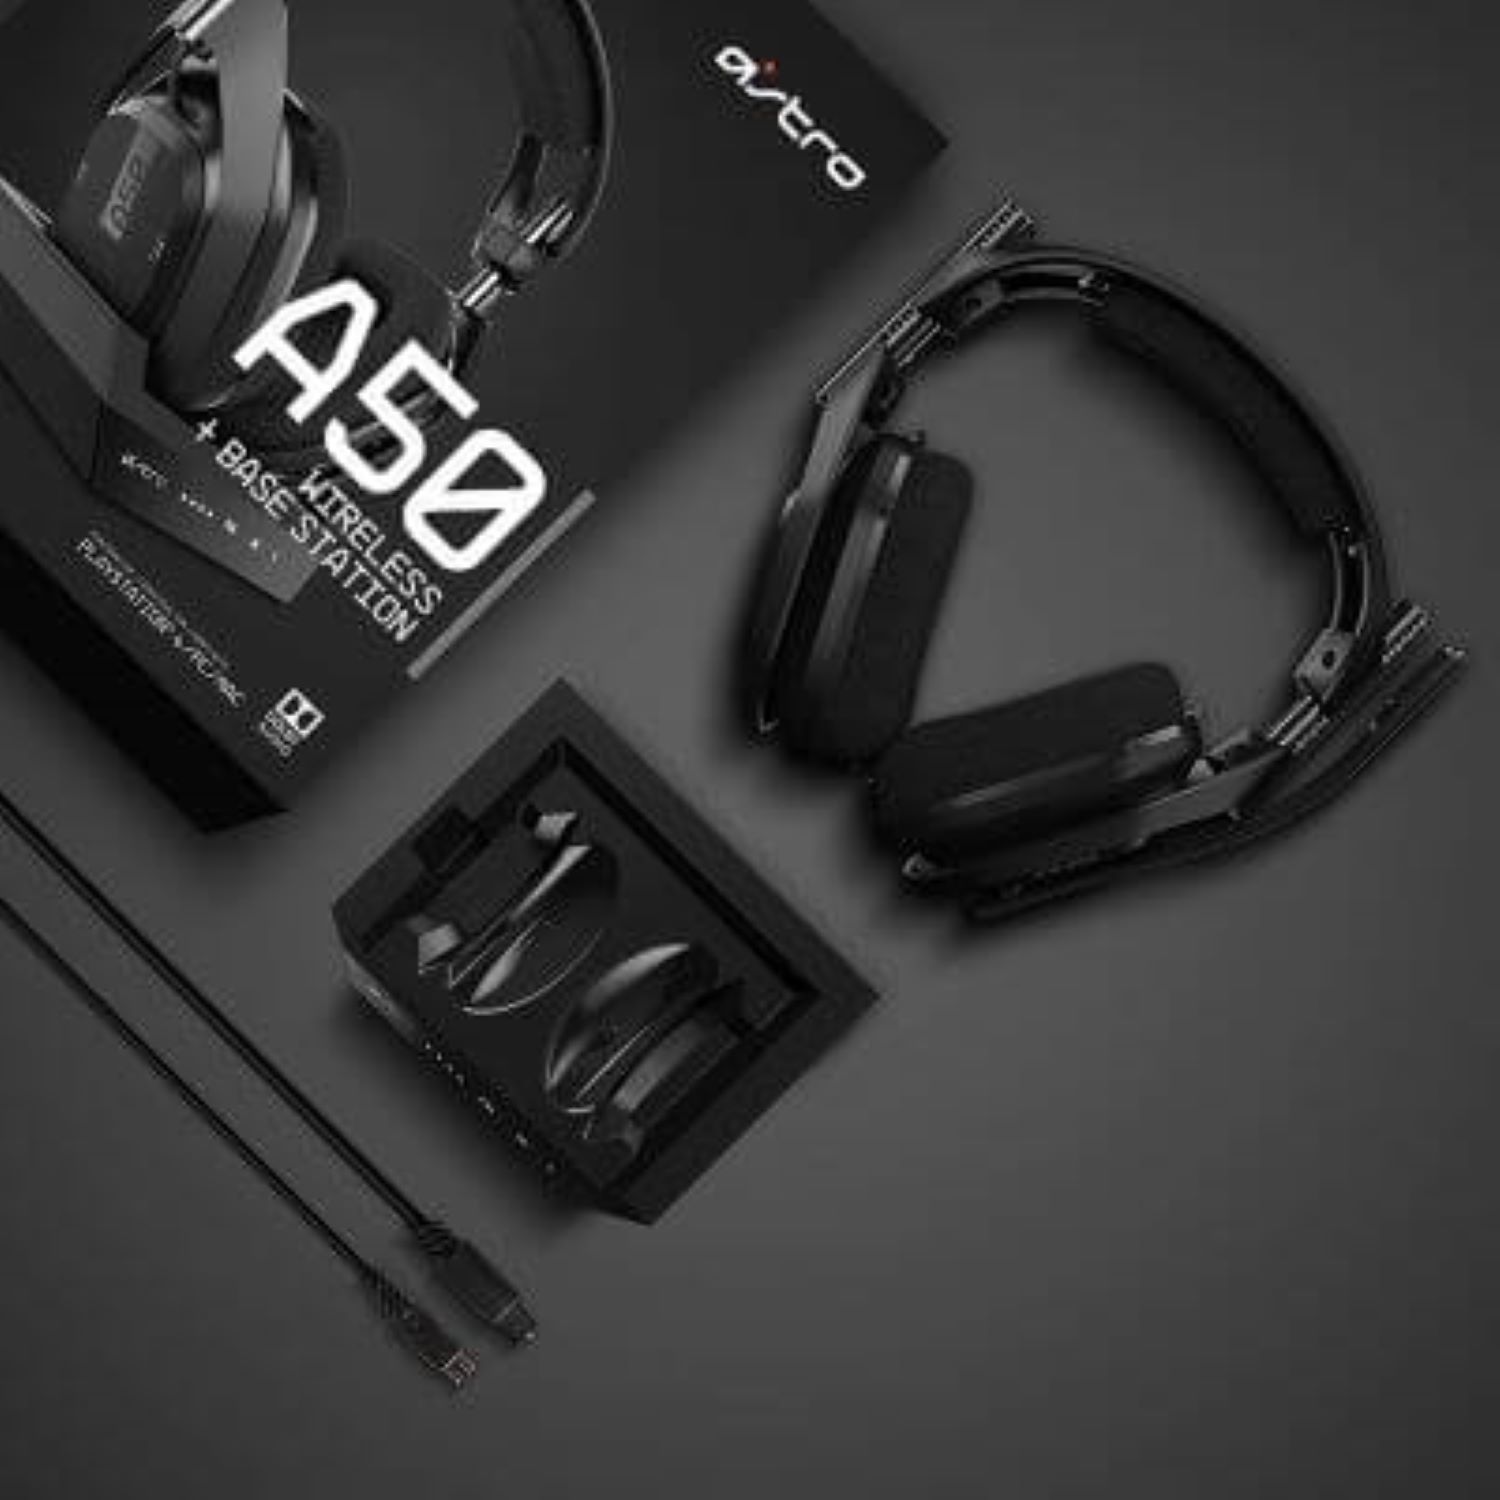 ASTRO Wireless Headset and Base Station